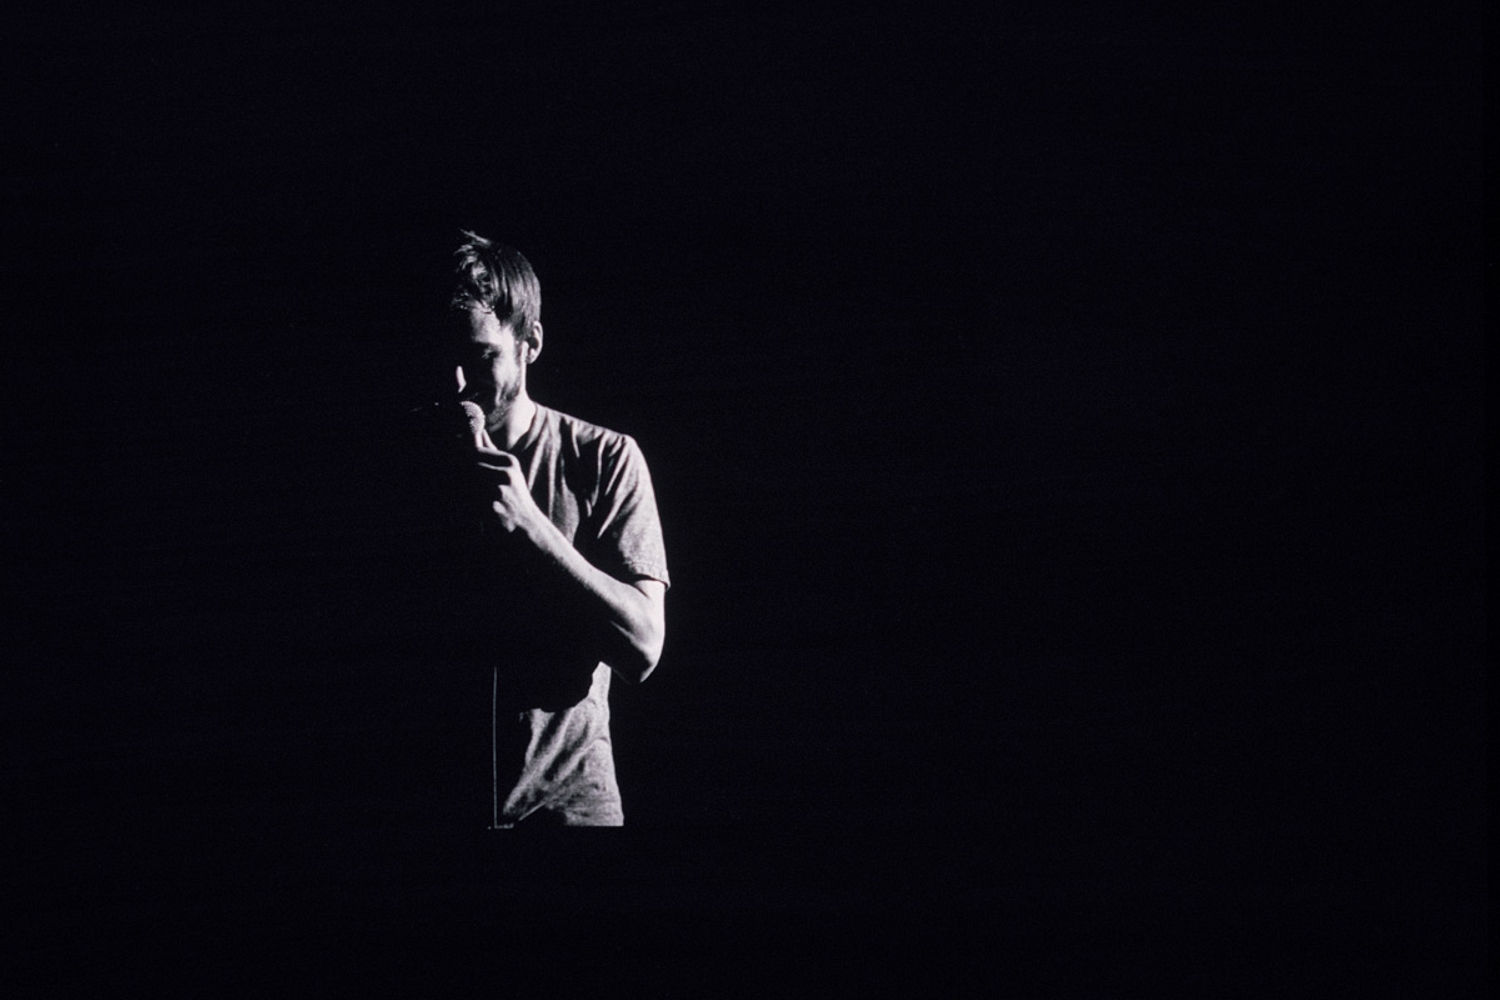 Watch Nils Frahm cover John Cage’s ‘4’33’ ahead of ‘Late Night Tales’ mix